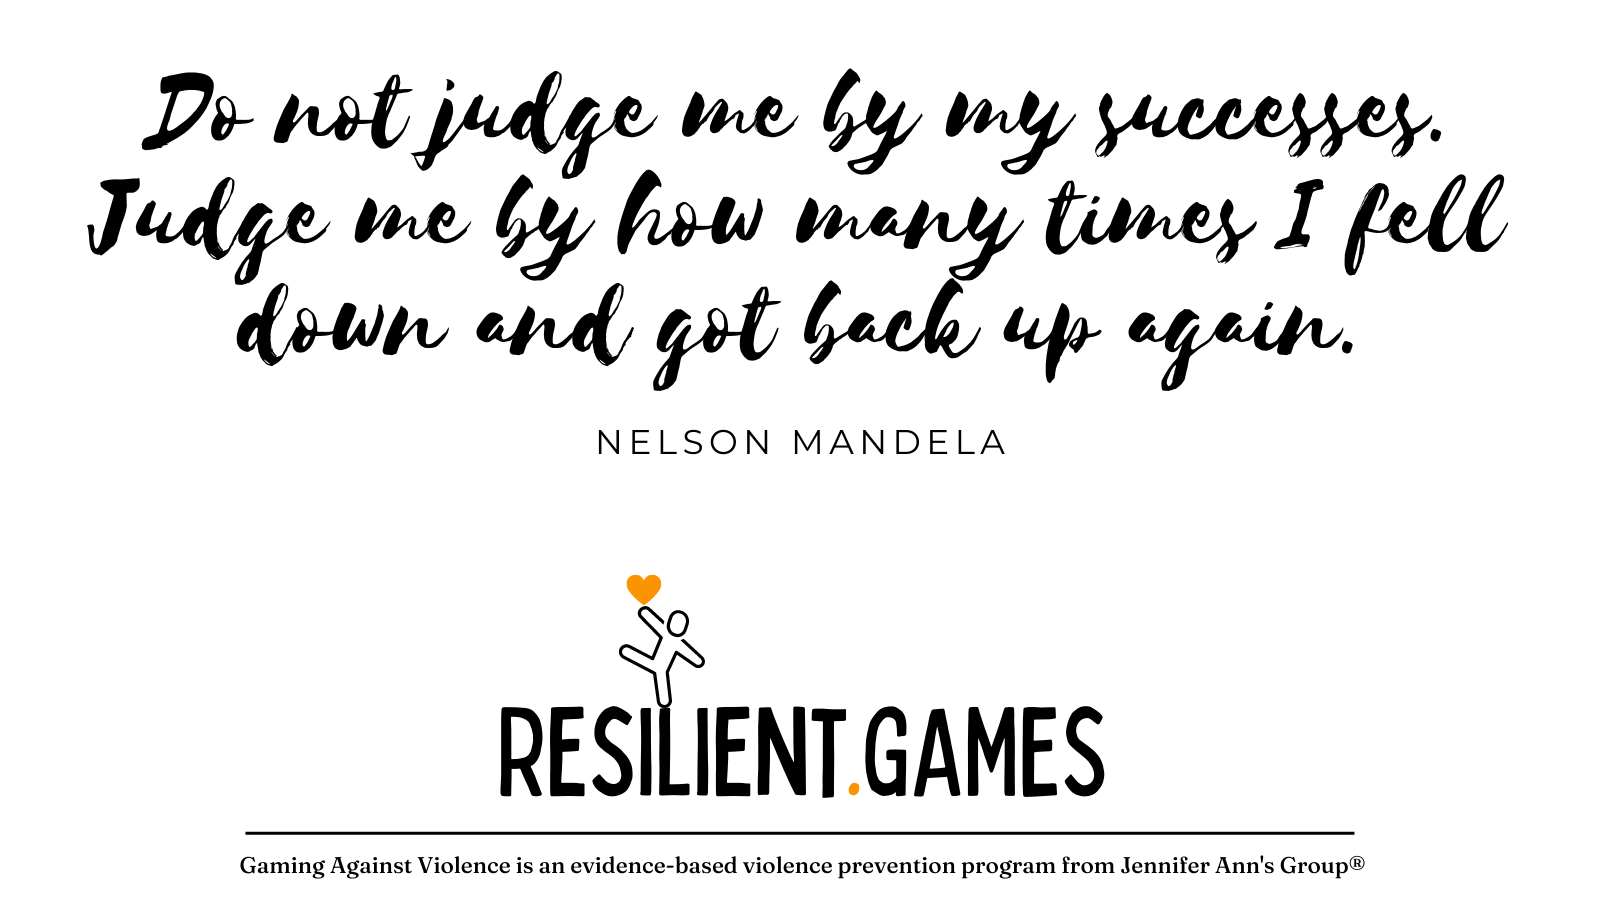 Do not judge me by my successes. Judge me by how many times I fell down and got back up again. ~Nelson Mandela